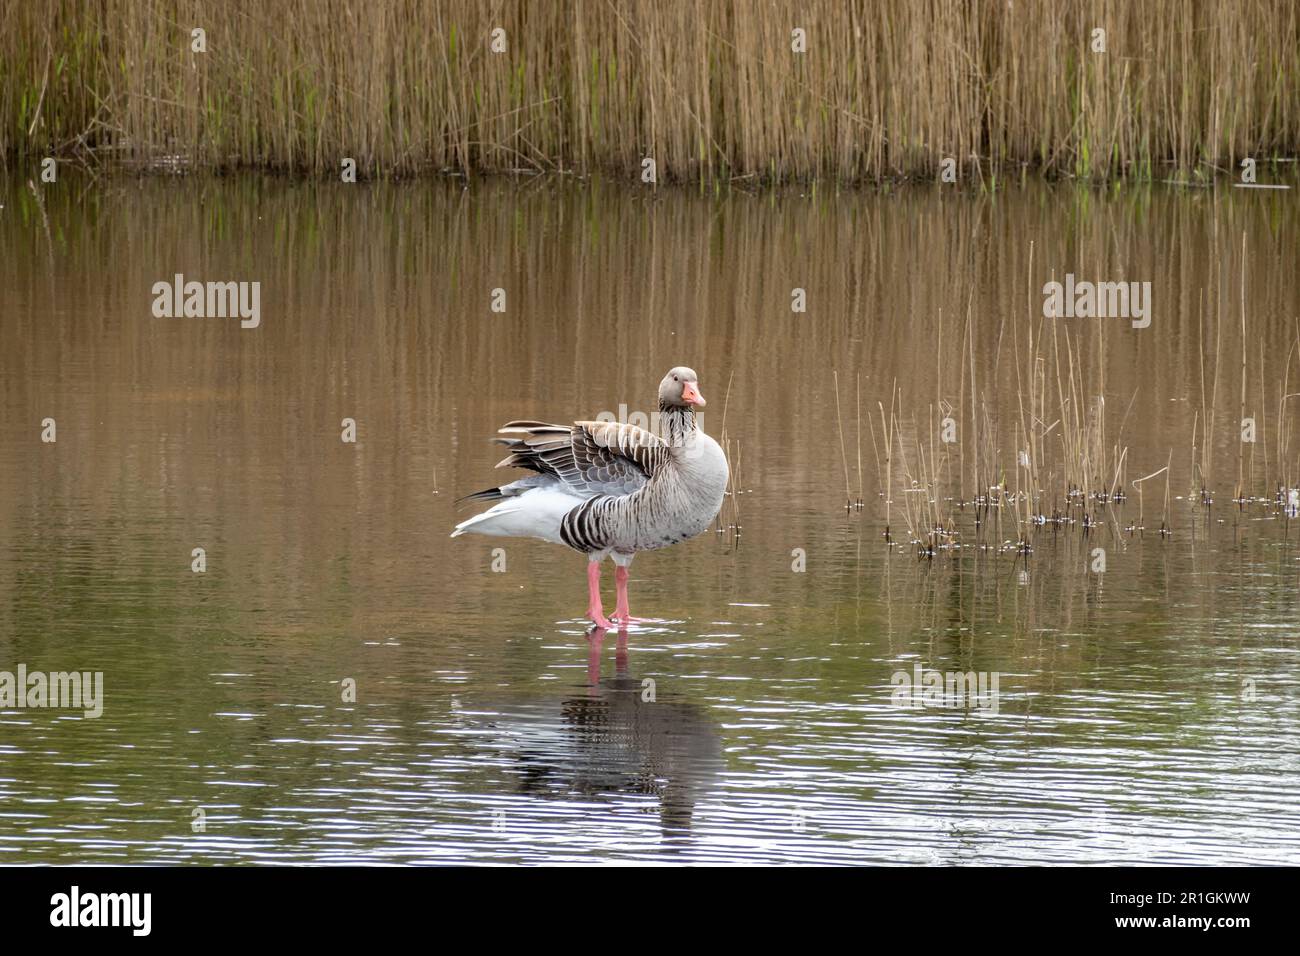 Greylag goose, Anser anser, standing in shallow water shaking wings in nature reserve Zanderij Crailo, Hilversum, Netherlands Stock Photo